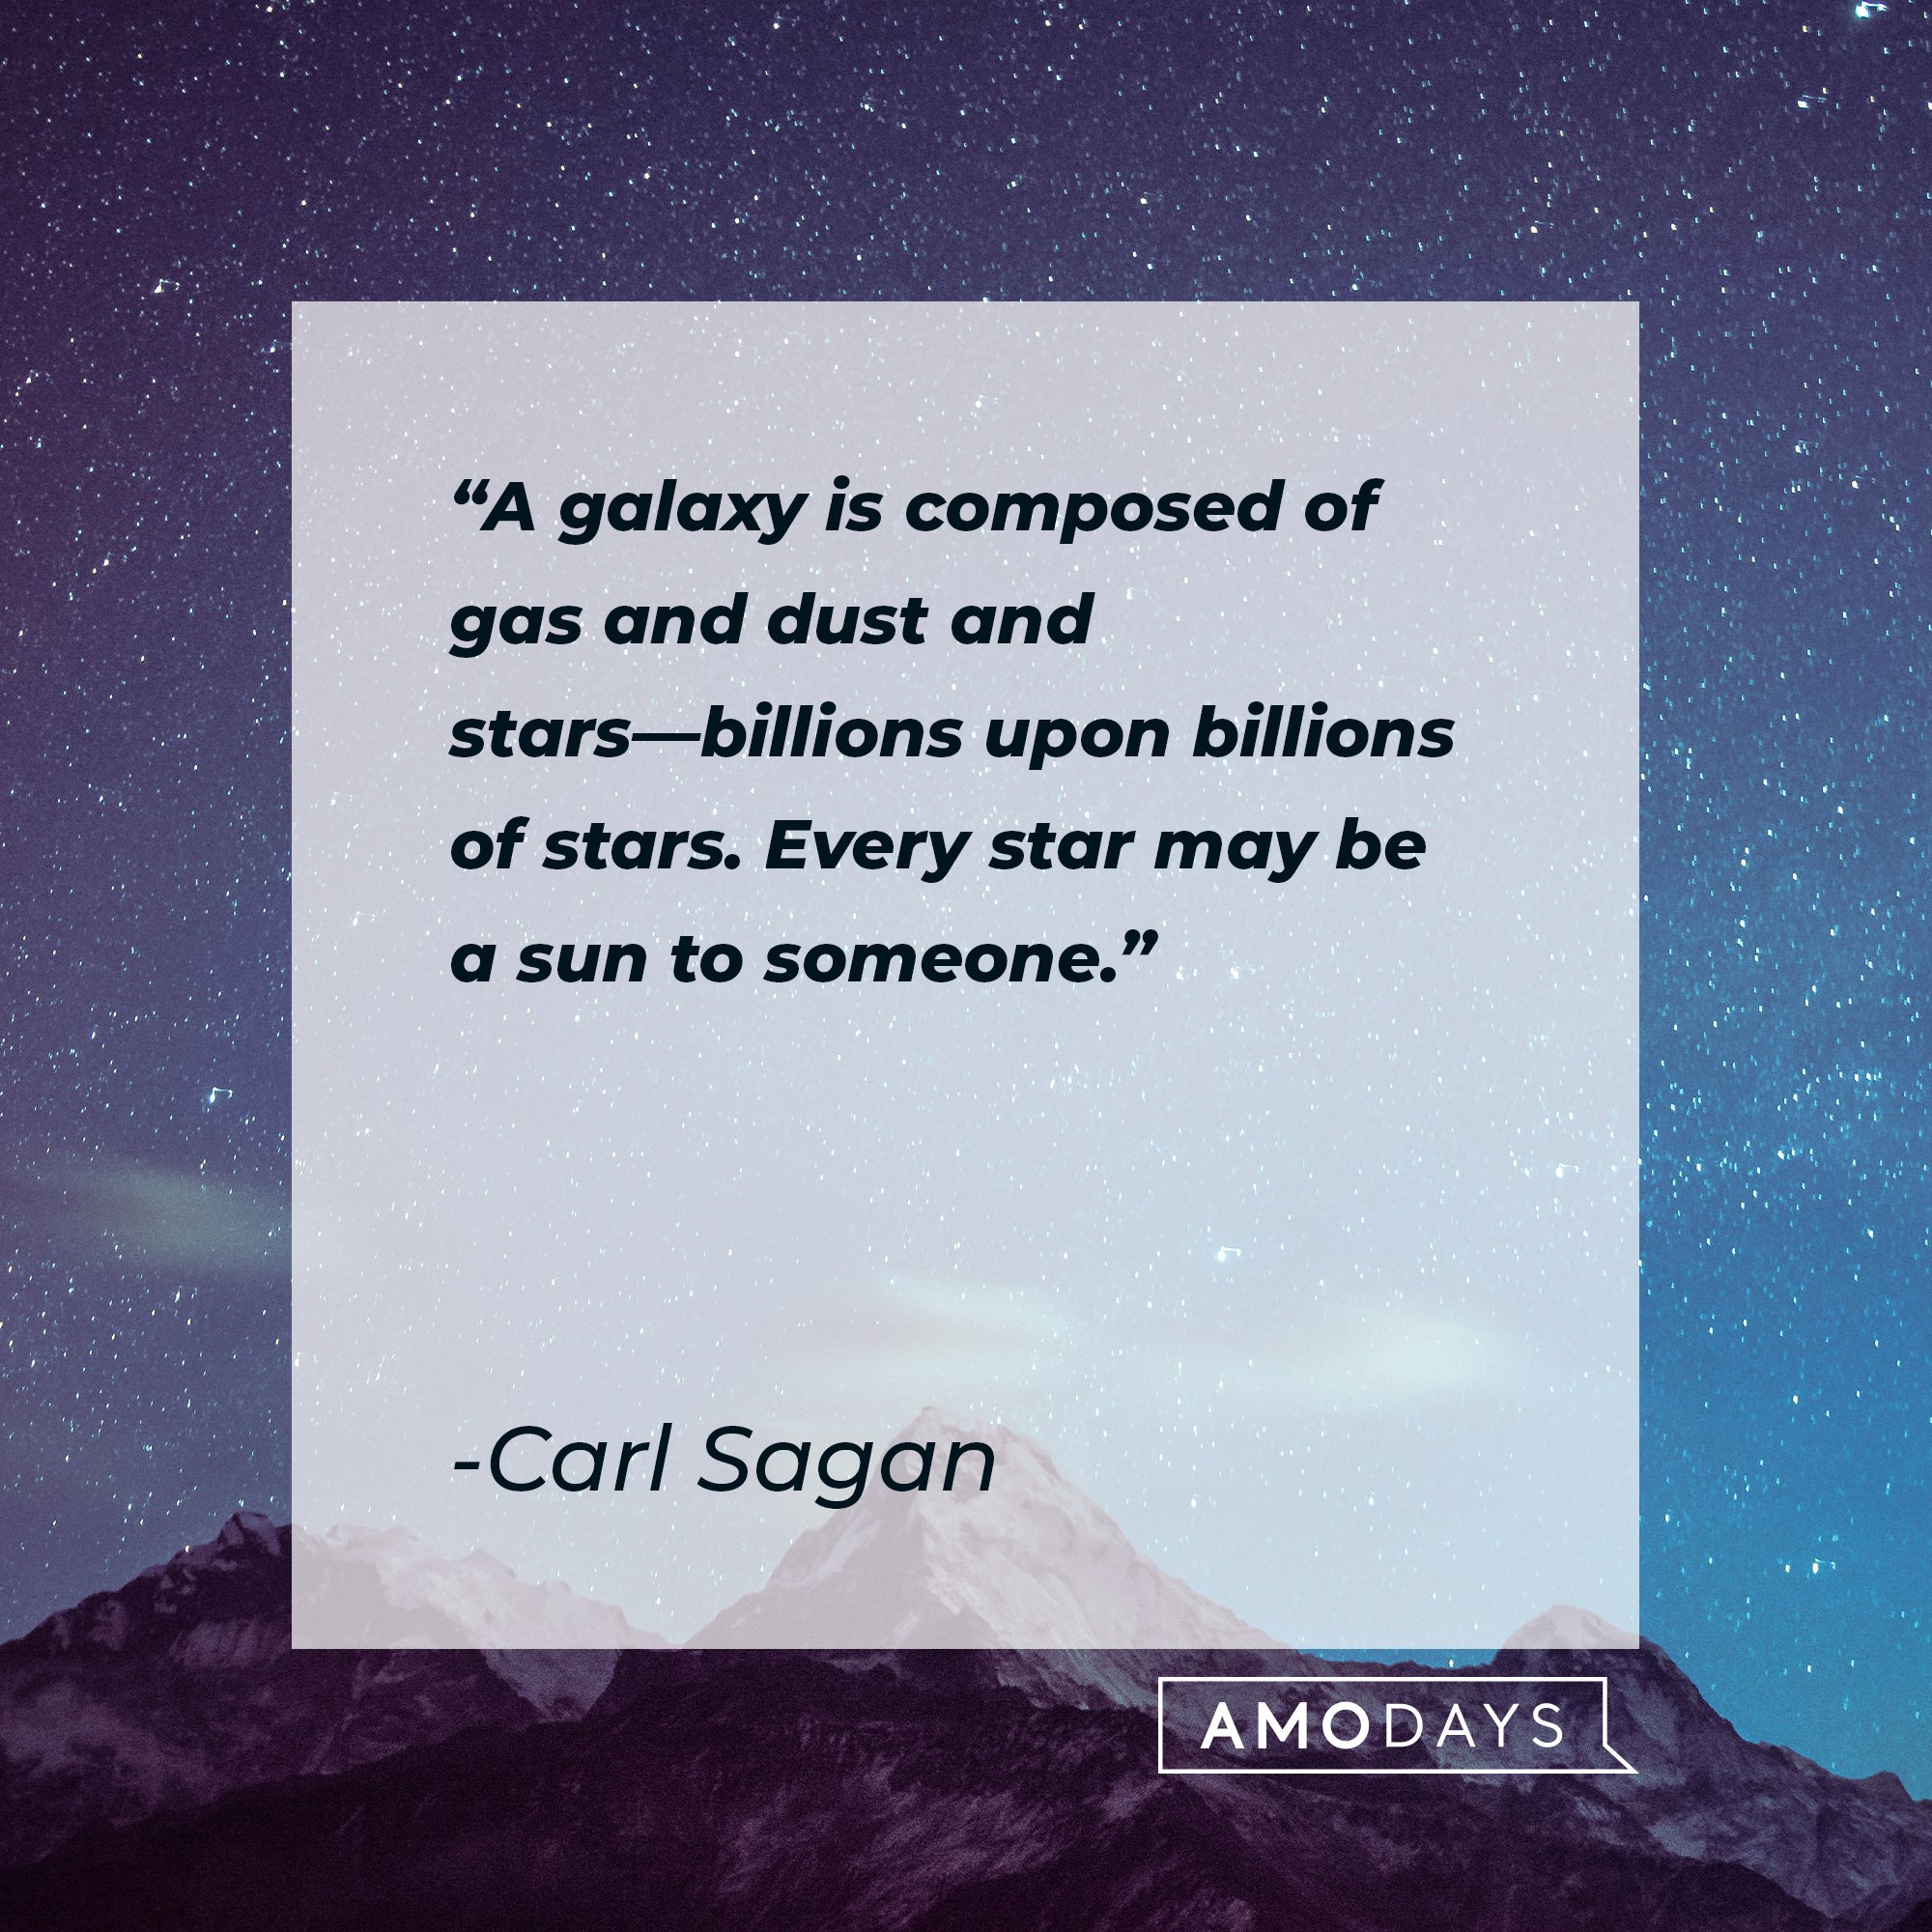 Carl Sagan’s quote: "A galaxy is composed of gas and dust and stars—billions upon billions of stars. Every star may be a sun to someone."  | Image: AmoDays